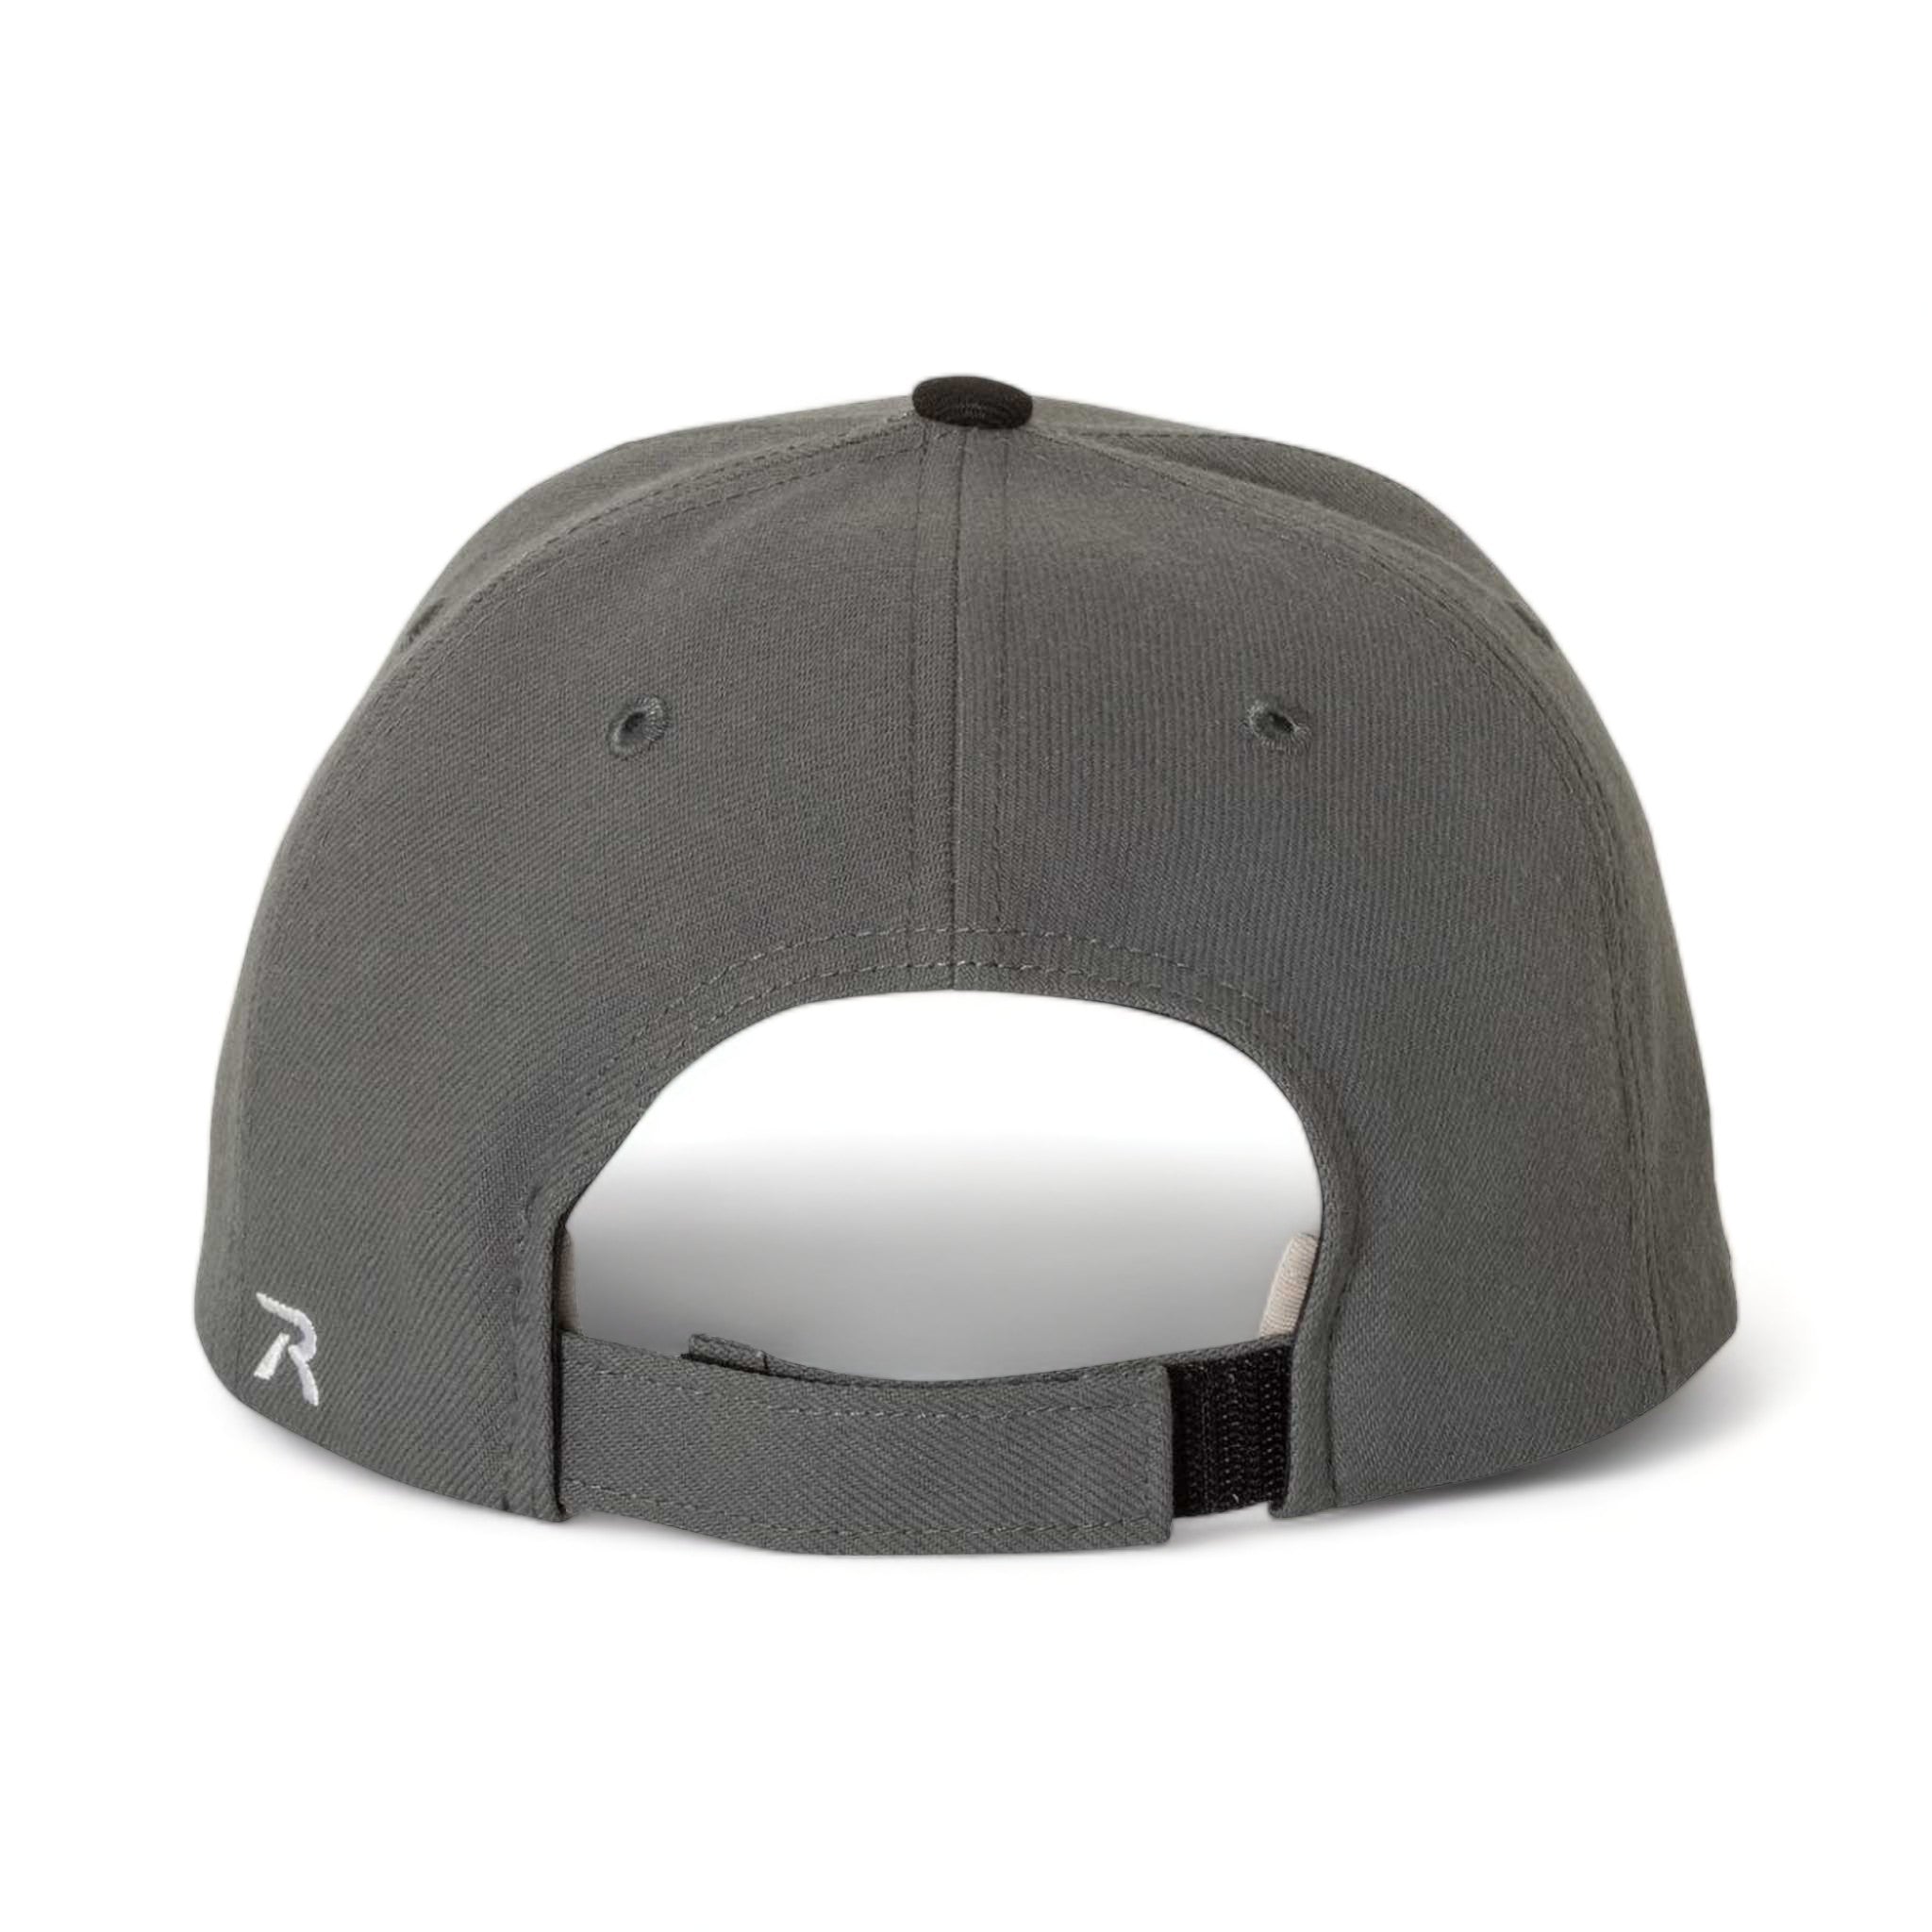 Back view of Richardson 514 custom hat in charcoal and black